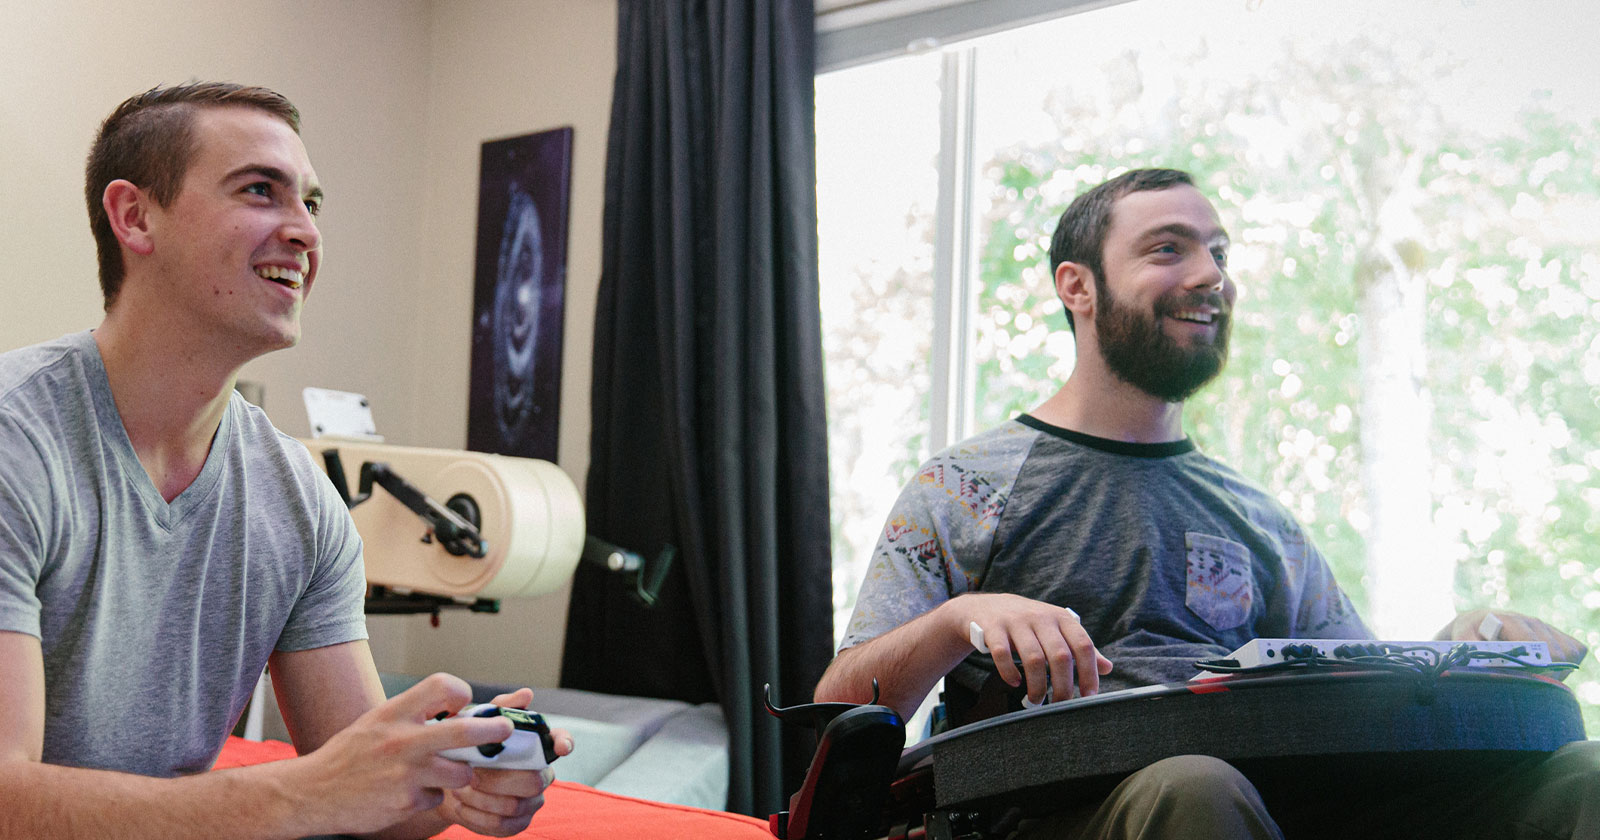 Spencer Allen plays a game with his friend using the Xbox Adaptive Controller.